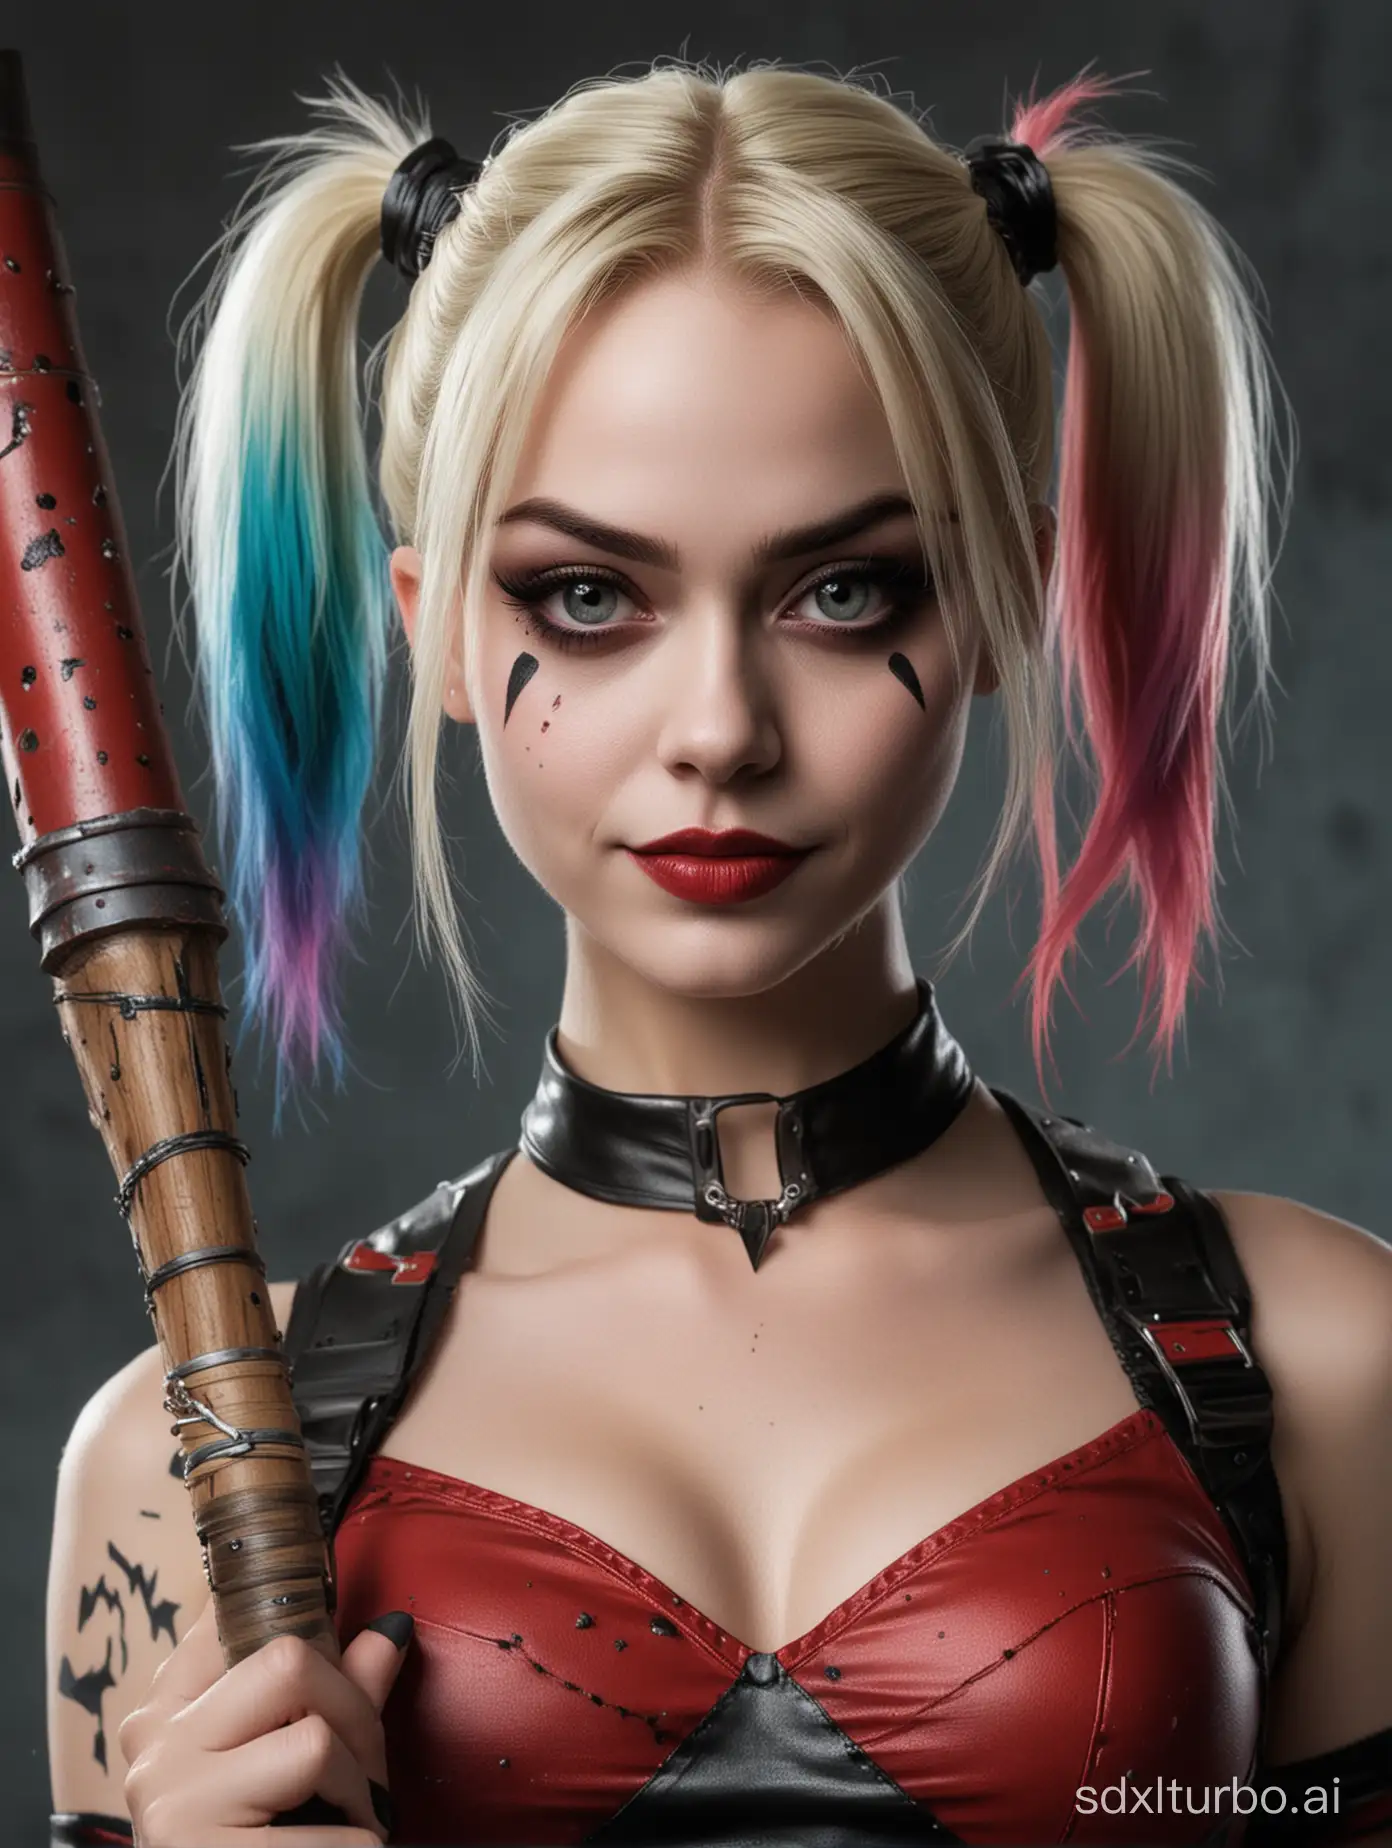 harley quin, very beautiful, with perfect face, holding a bat with nails